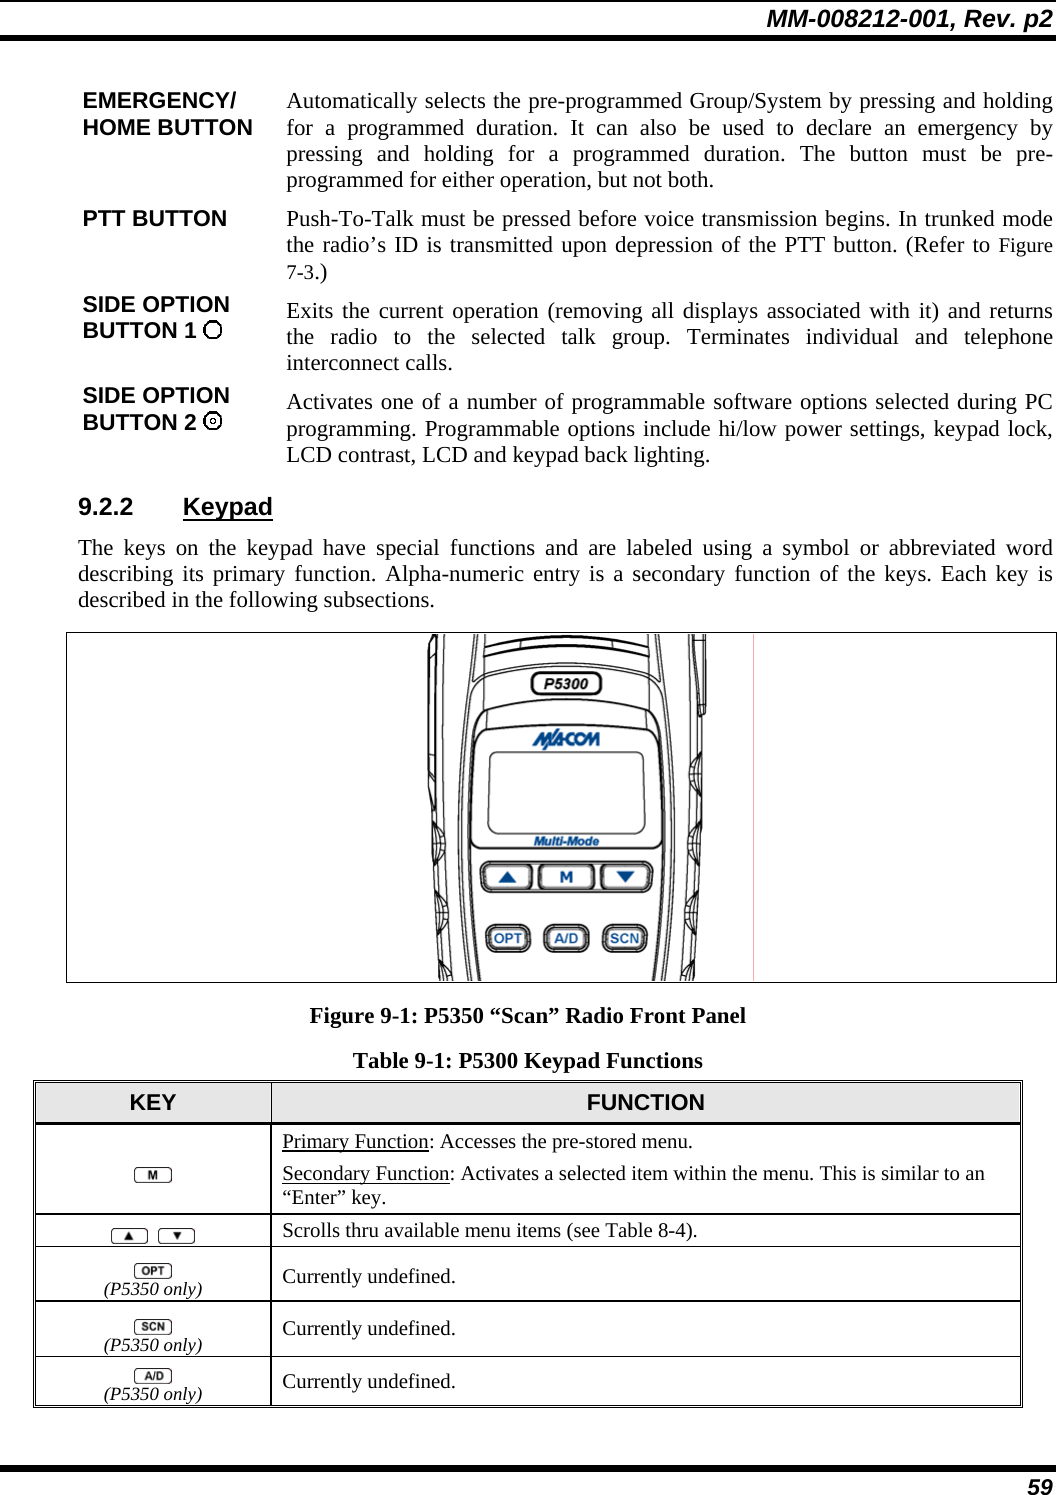 MM-008212-001, Rev. p2 59 EMERGENCY/ HOME BUTTON  Automatically selects the pre-programmed Group/System by pressing and holding for a programmed duration. It can also be used to declare an emergency by pressing and holding for a programmed duration. The button must be pre-programmed for either operation, but not both. PTT BUTTON  Push-To-Talk must be pressed before voice transmission begins. In trunked mode the radio’s ID is transmitted upon depression of the PTT button. (Refer to Figure 7-3.) SIDE OPTION BUTTON 1   Exits the current operation (removing all displays associated with it) and returns the radio to the selected talk group. Terminates individual and telephone interconnect calls. SIDE OPTION BUTTON 2   Activates one of a number of programmable software options selected during PC programming. Programmable options include hi/low power settings, keypad lock, LCD contrast, LCD and keypad back lighting. 9.2.2 Keypad The keys on the keypad have special functions and are labeled using a symbol or abbreviated word describing its primary function. Alpha-numeric entry is a secondary function of the keys. Each key is described in the following subsections.  Figure 9-1: P5350 “Scan” Radio Front Panel Table 9-1: P5300 Keypad Functions KEY  FUNCTION  Primary Function: Accesses the pre-stored menu.  Secondary Function: Activates a selected item within the menu. This is similar to an “Enter” key.     Scrolls thru available menu items (see Table 8-4).  (P5350 only) Currently undefined.  (P5350 only) Currently undefined.  (P5350 only) Currently undefined. 